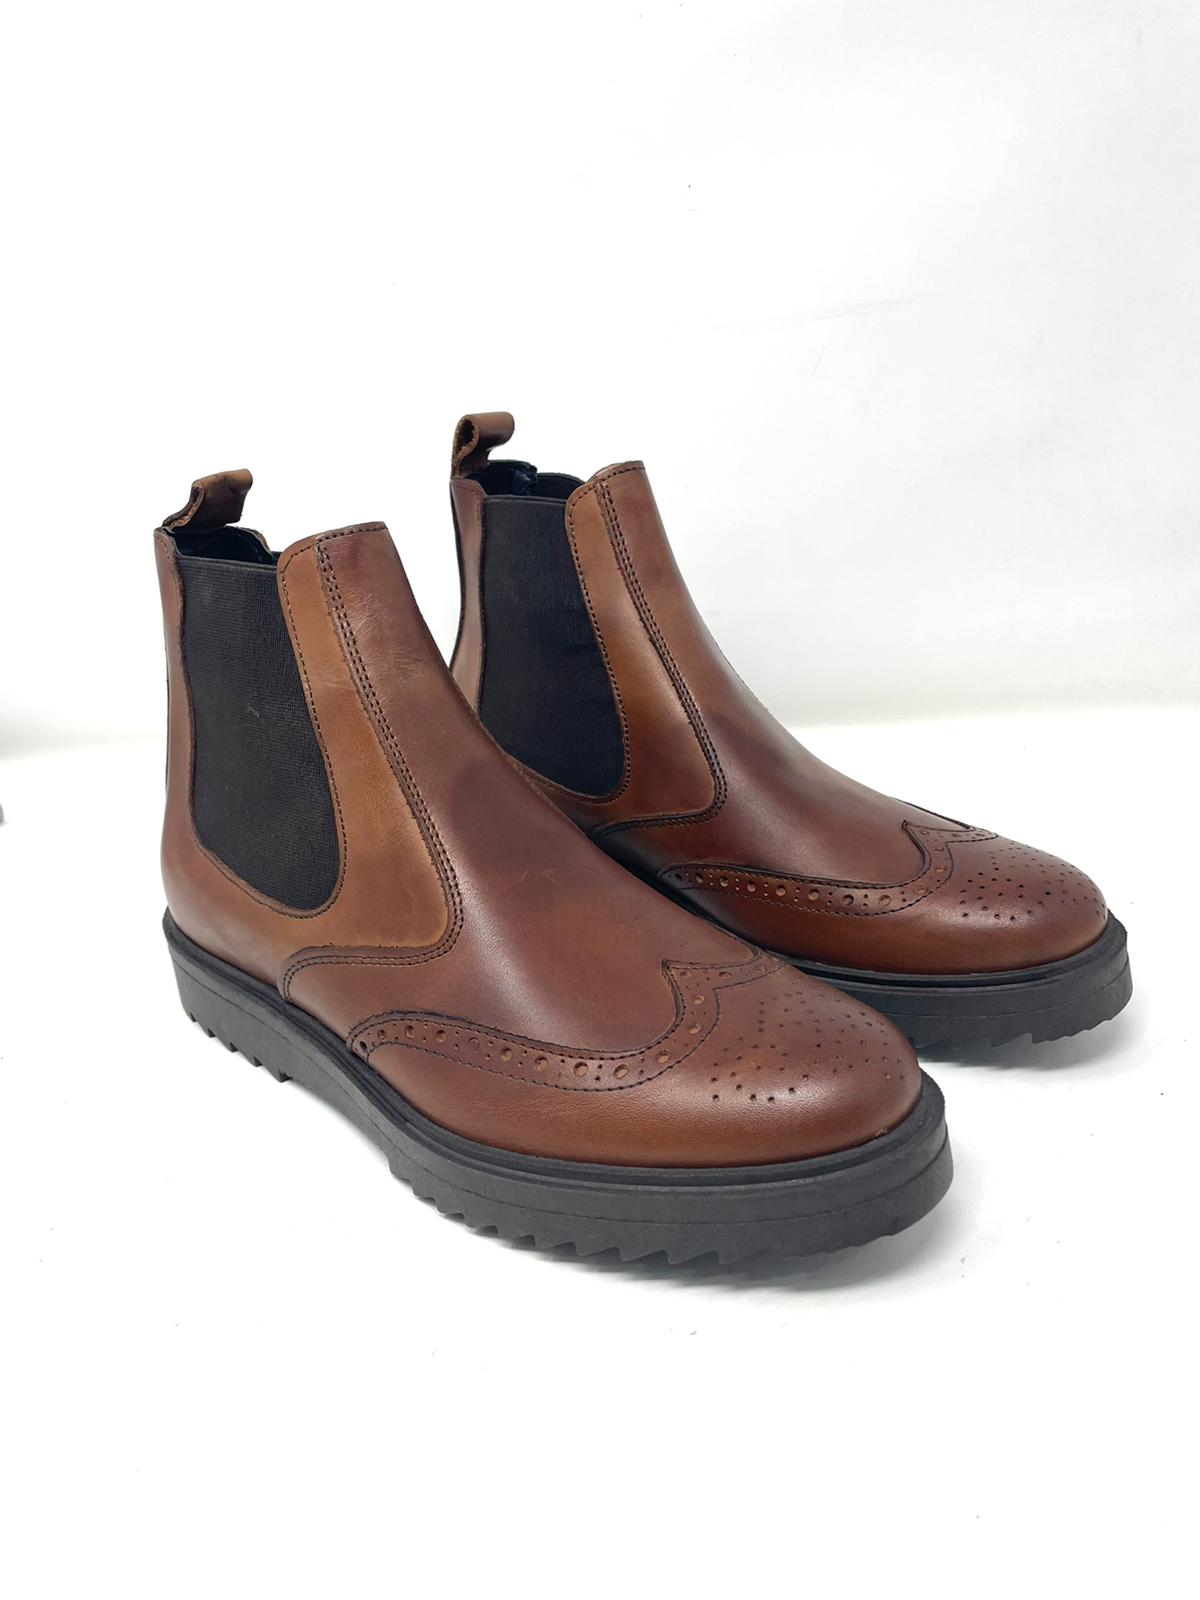 Beatles ankle boot with monogram in genuine leather made in Italy with wedge sole